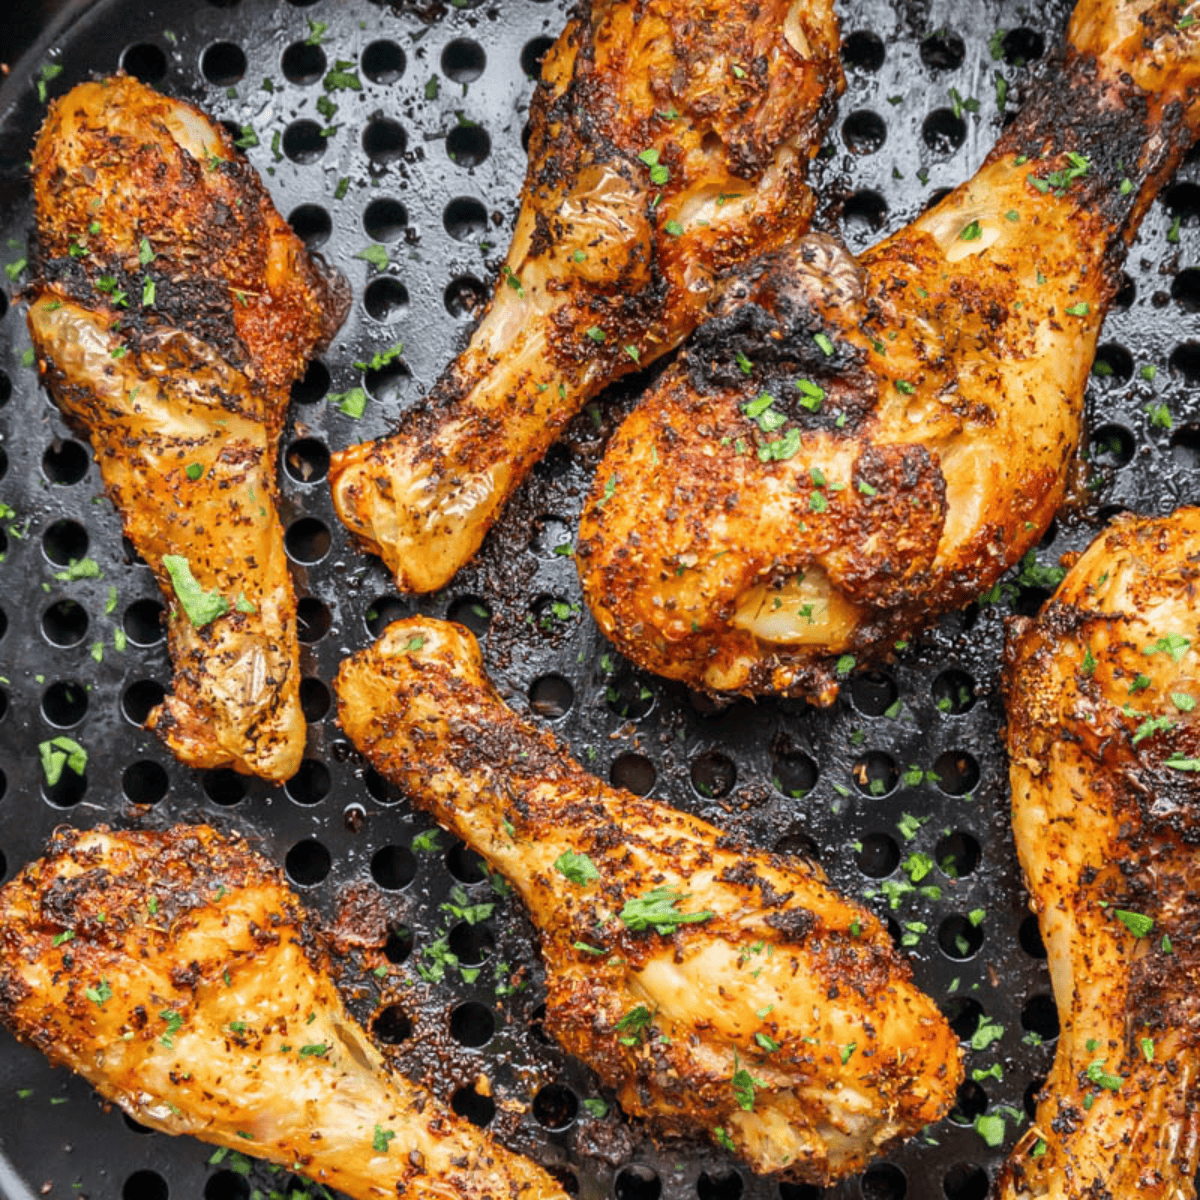 Decorative thumbnail preview image of Air Fryer Chicken Drumsticks.